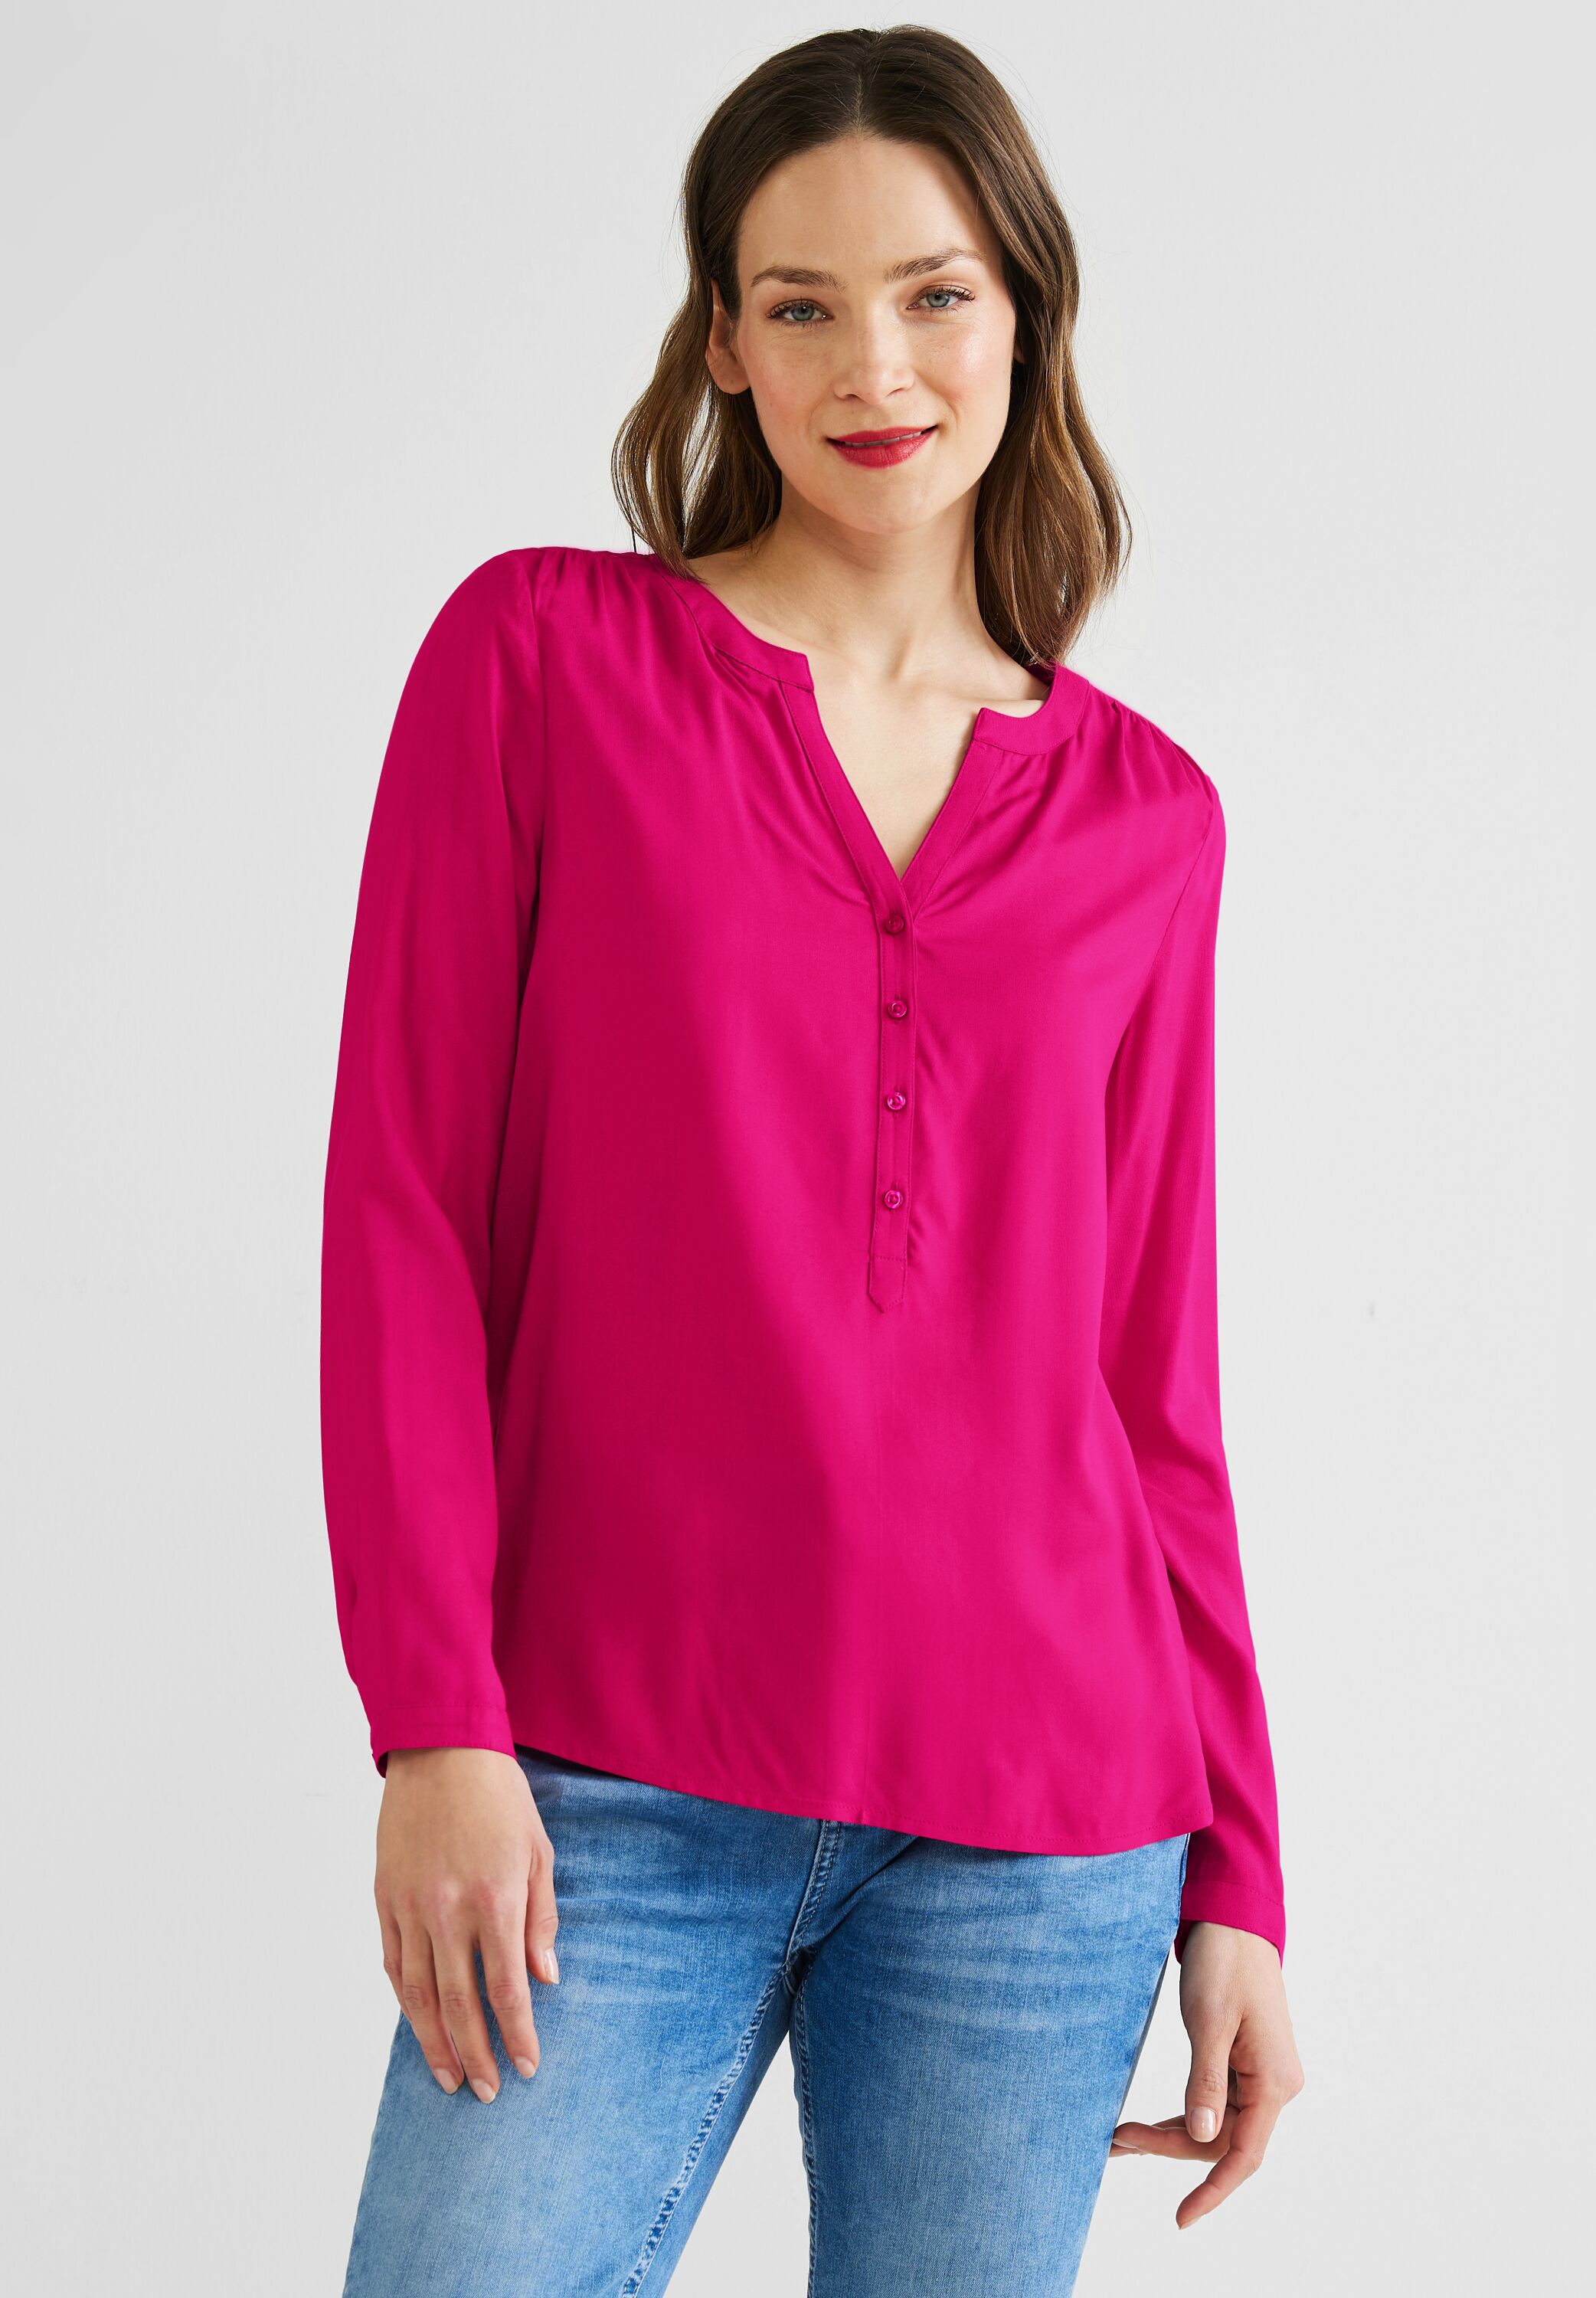 Street One Bluse Bamika in Nu Pink im SALE reduziert A343792-14717 -  CONCEPT Mode